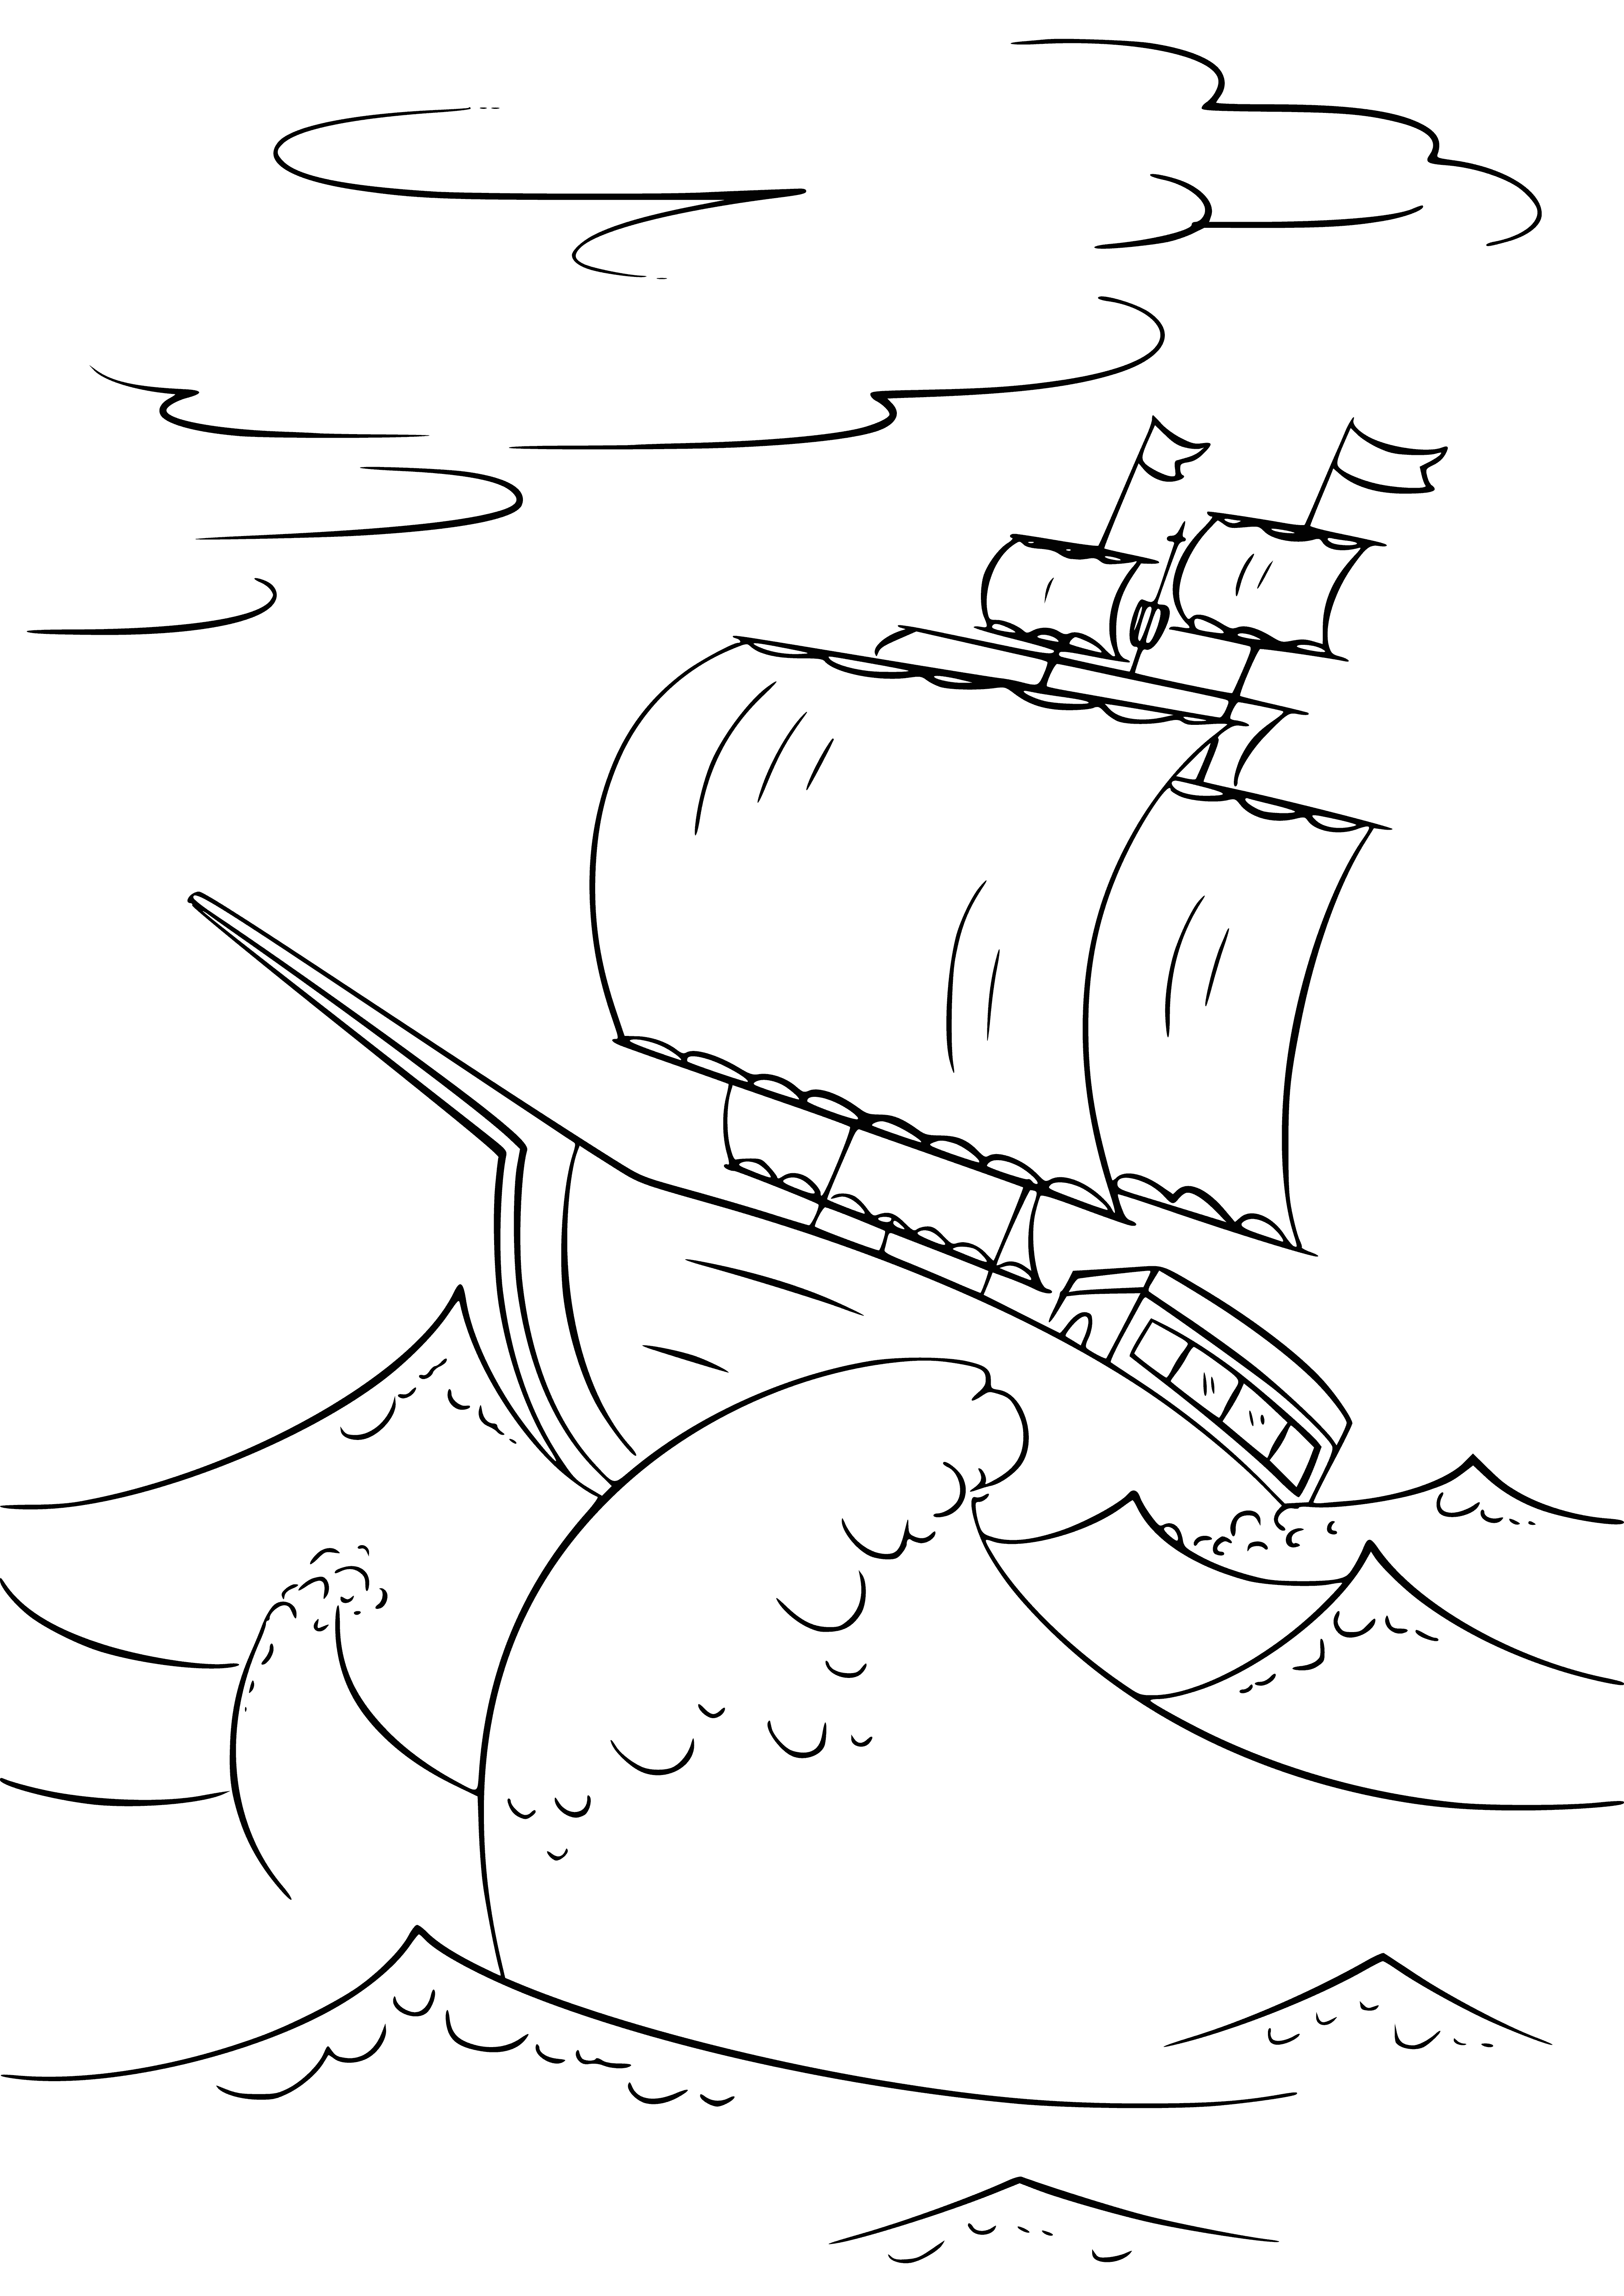 coloring page: Sailboats battened down during storm as waves crash against rocks & wind blowing trees.